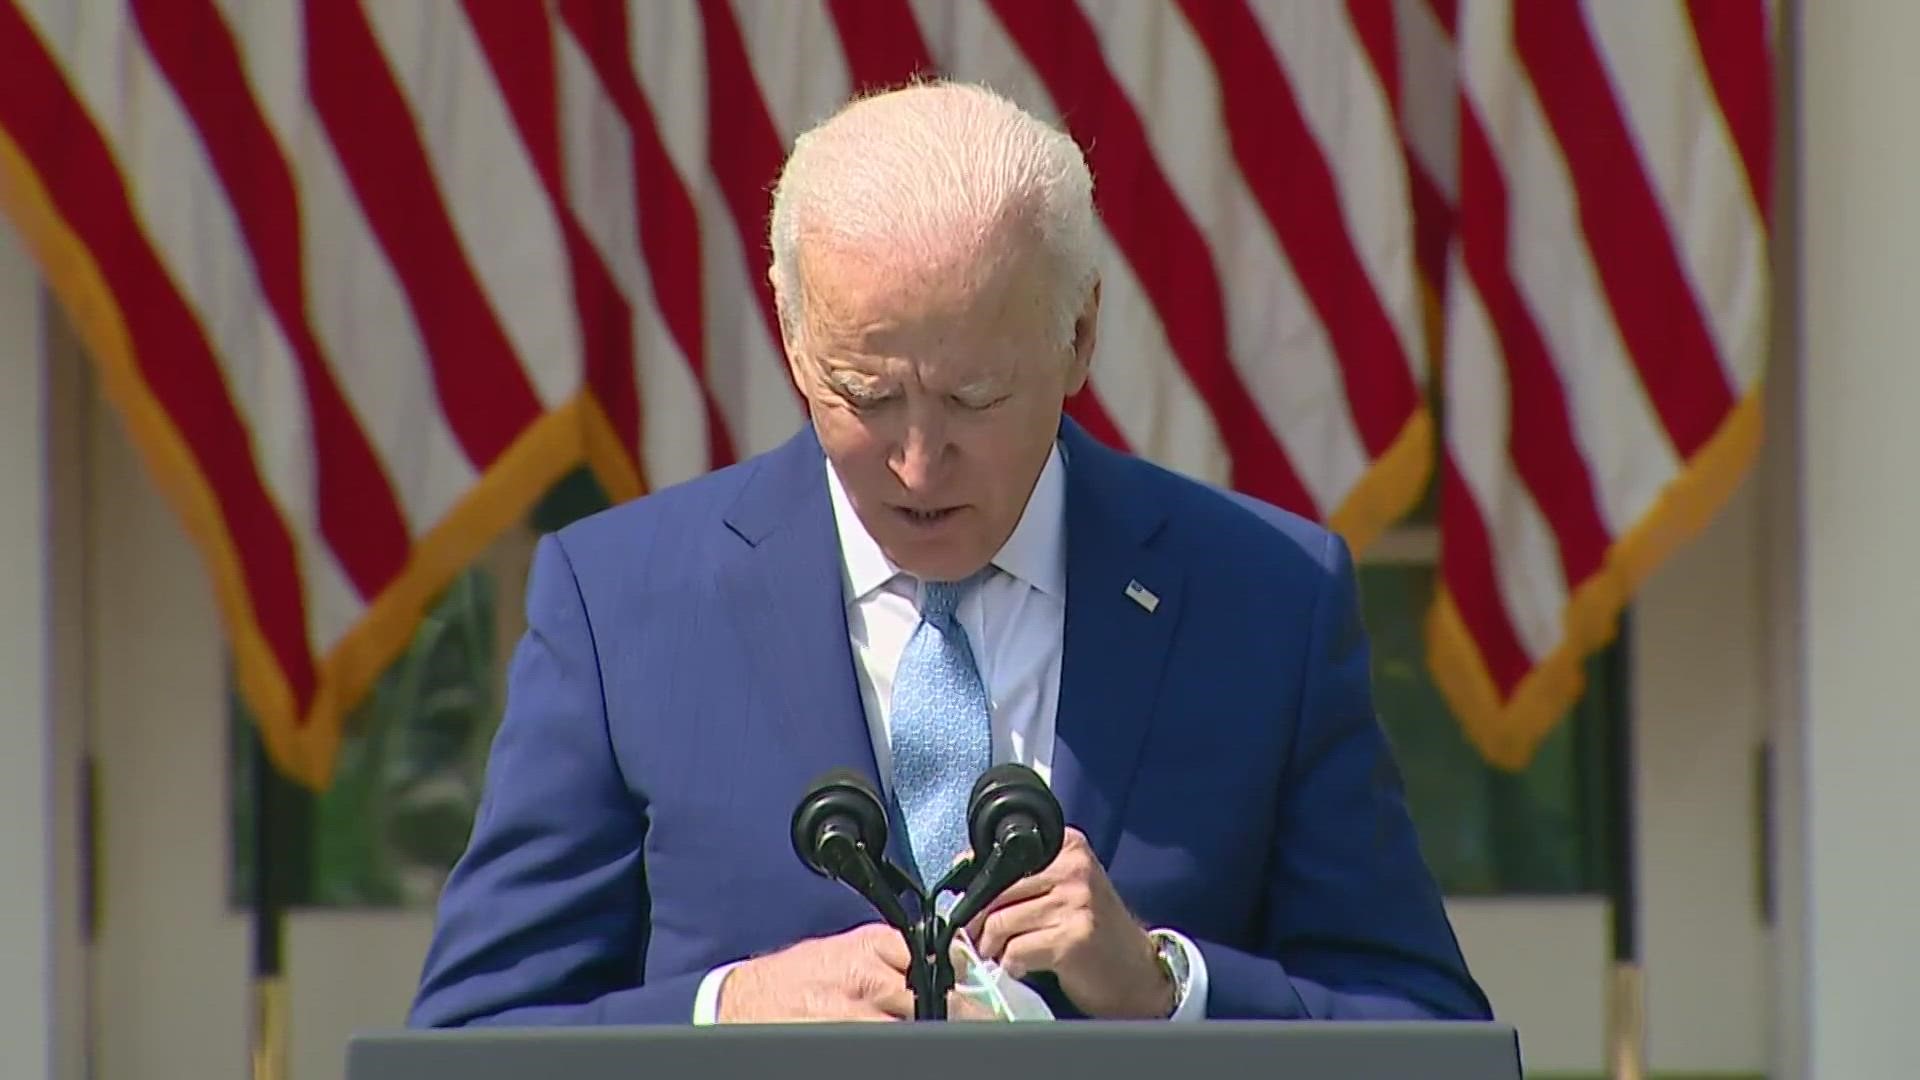 President Joe Biden addresses gun violence in America and announces executive actions to end the "epidemic."